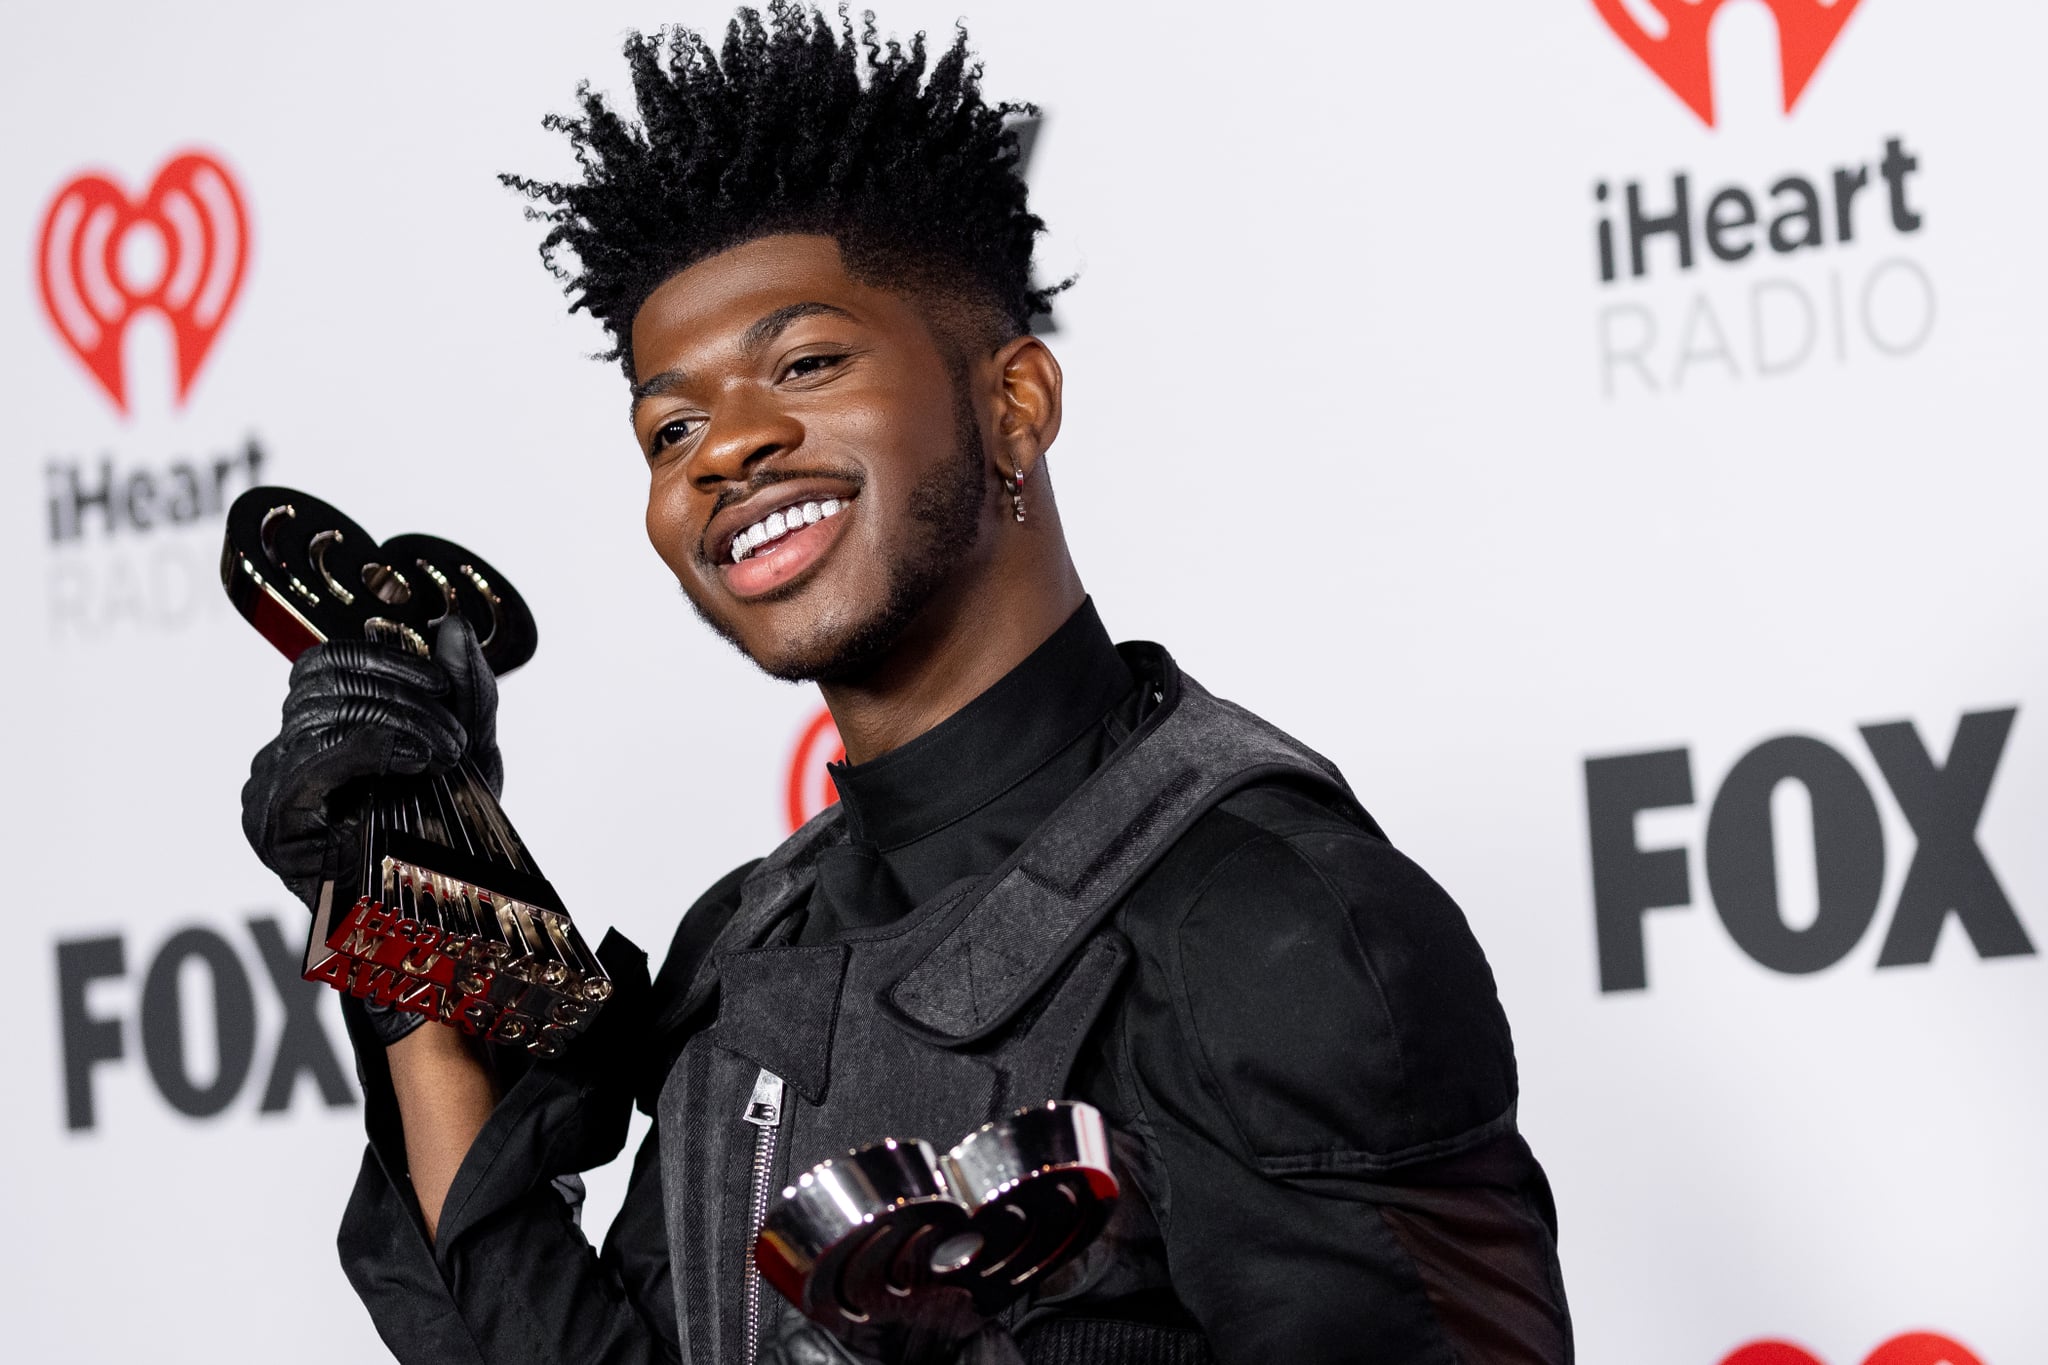 LOS ANGELES, CALIFORNIA - MARCH 22: Lil Nas X attends the 2022 iHeartRadio Music Awards press room at Shrine Auditorium and Expo Hall on March 22, 2022 in Los Angeles, California. (Photo by Emma McIntyre/WireImage)